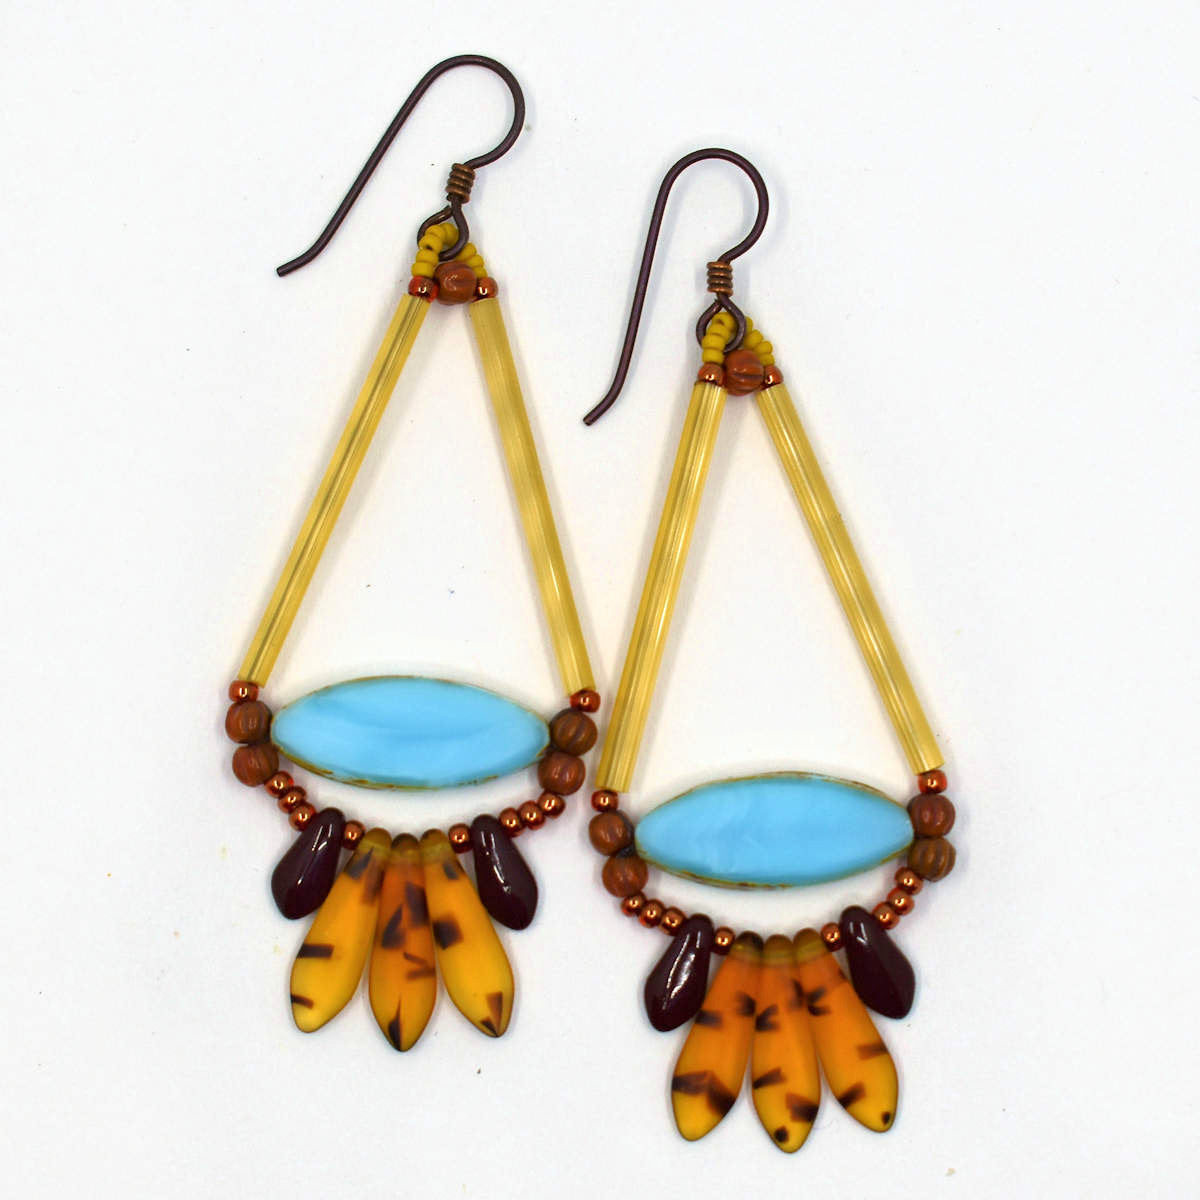 Long gold and amber earrings shaped like a teardrop with a wide light blue pointy oval at the base lay on a white background. At the bottom of the earrings' teardrop shape is a fan of five dagger beads, three transparent amber tortoiseshell in the center, sandwiched between two smaller dark brown daggers. The earrings have dark ear wires.